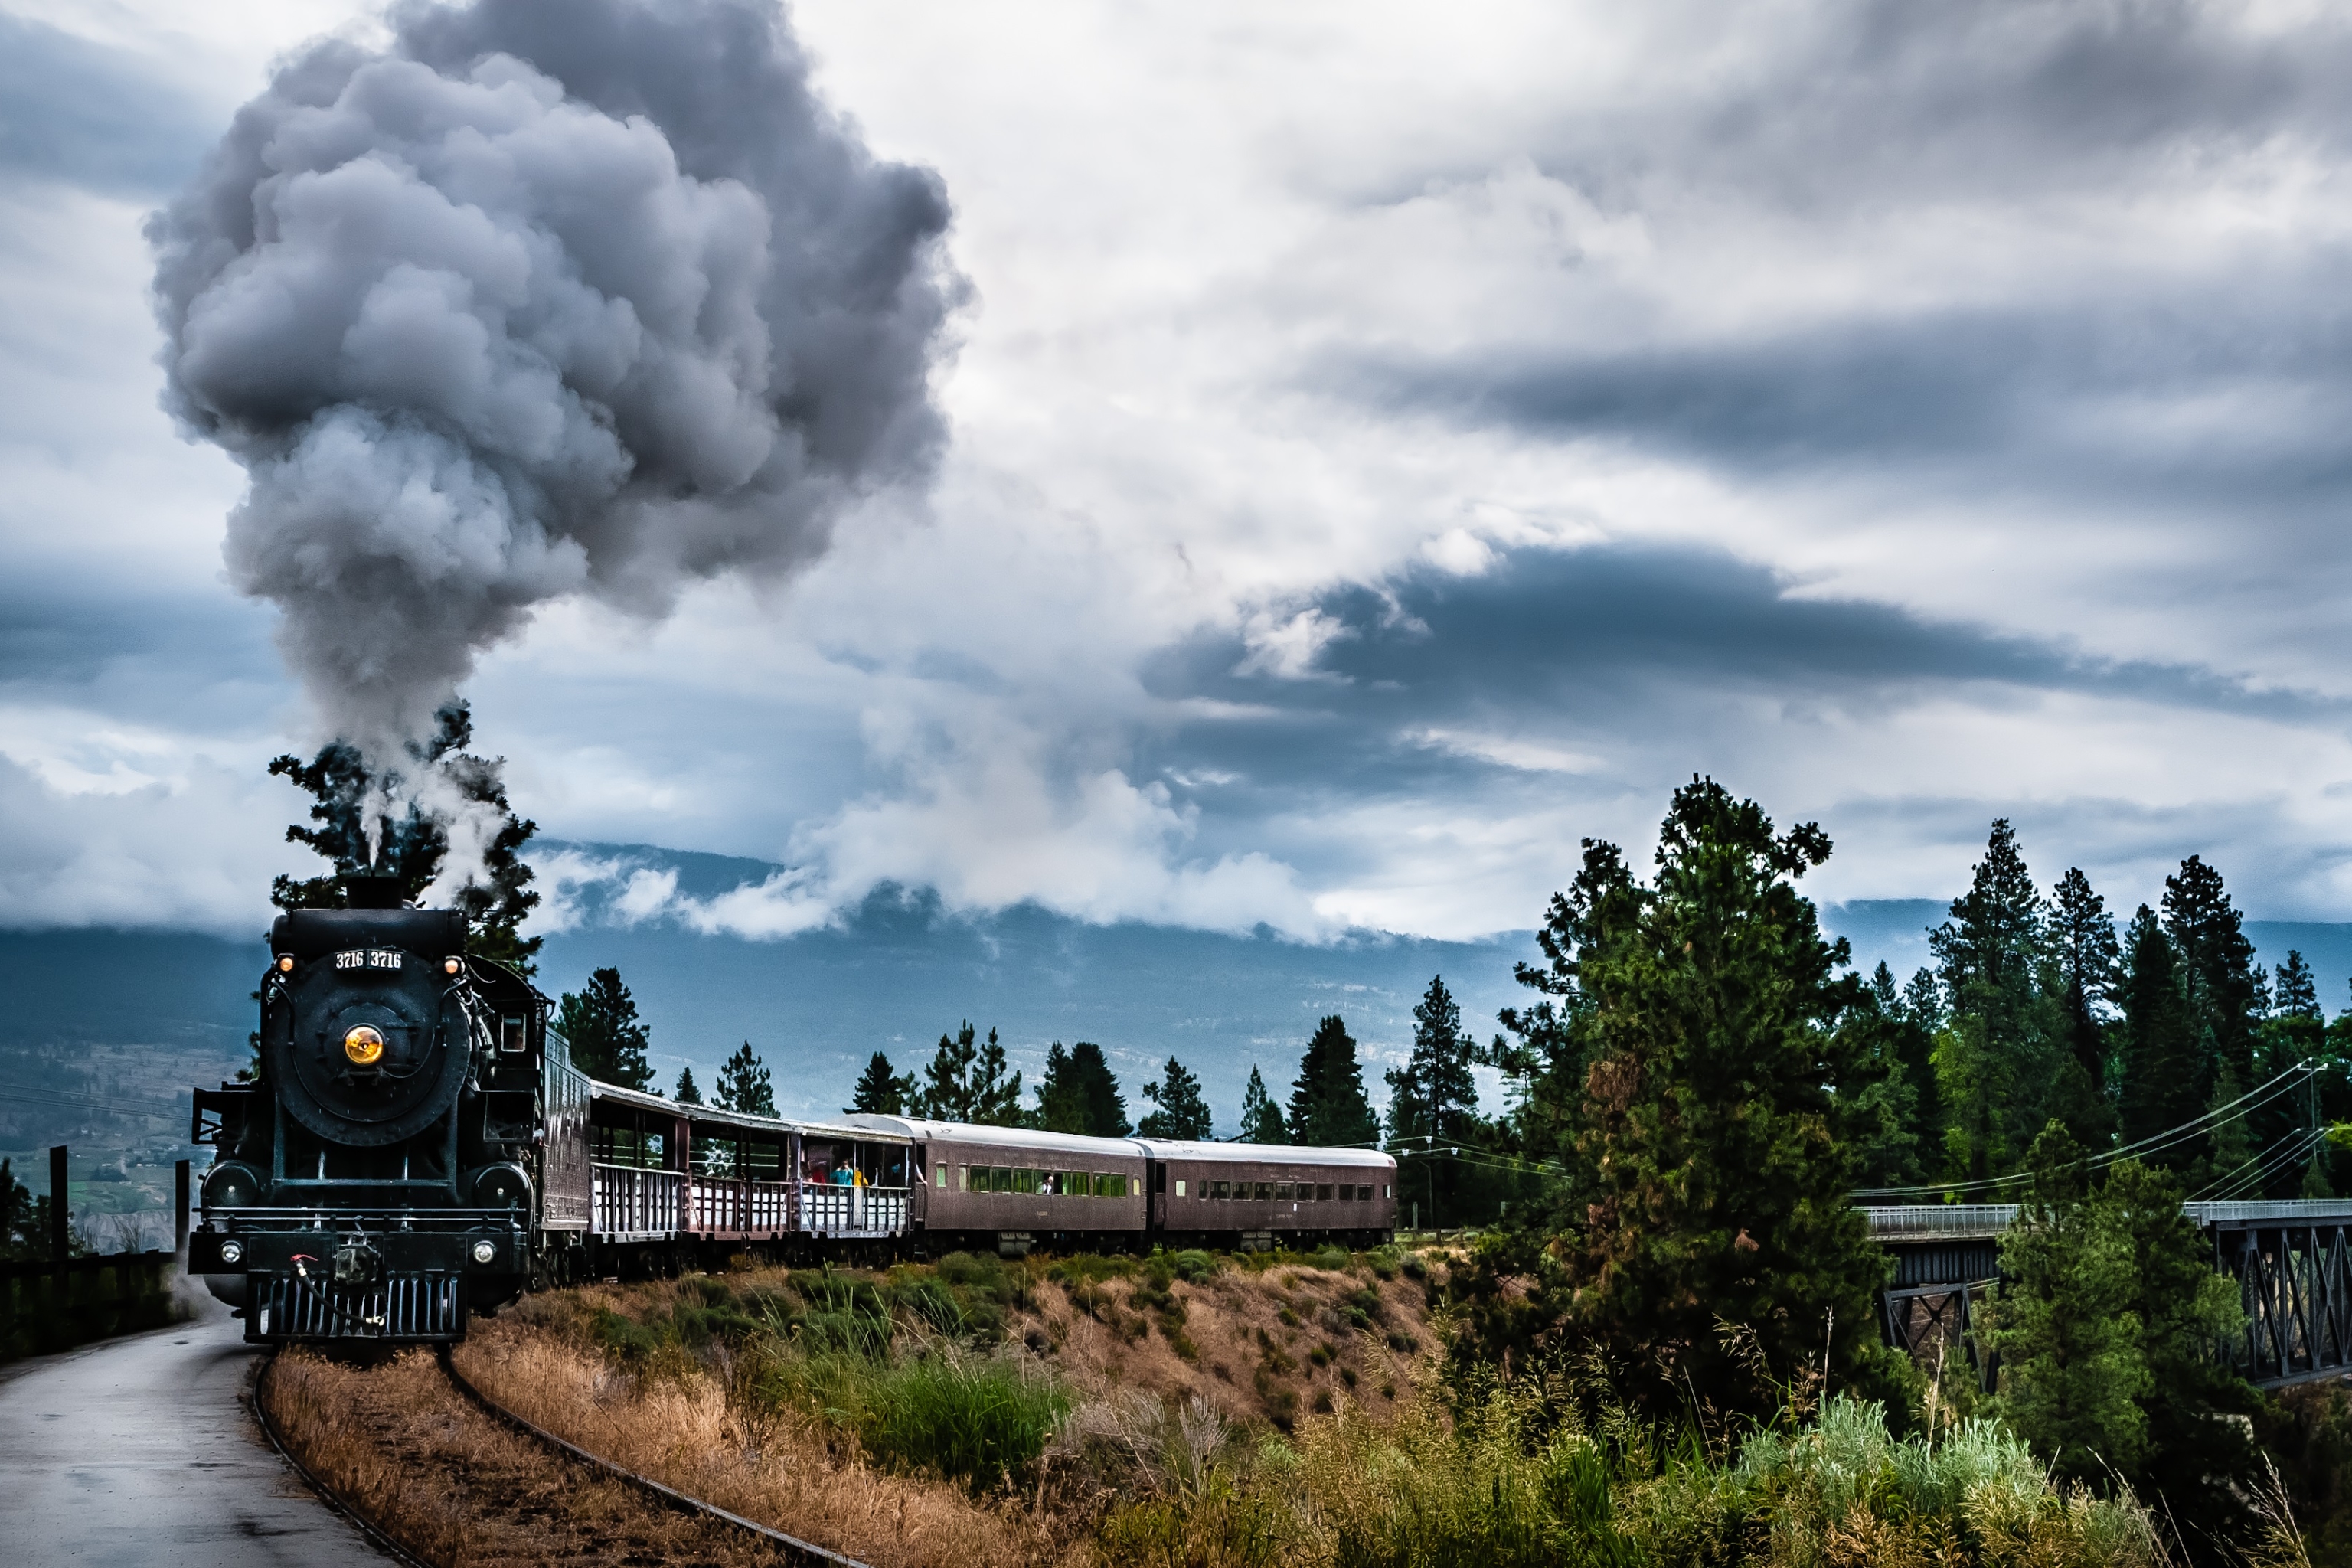 Download mobile wallpaper Hdr, Cloud, Train, Railroad, Vehicles for free.